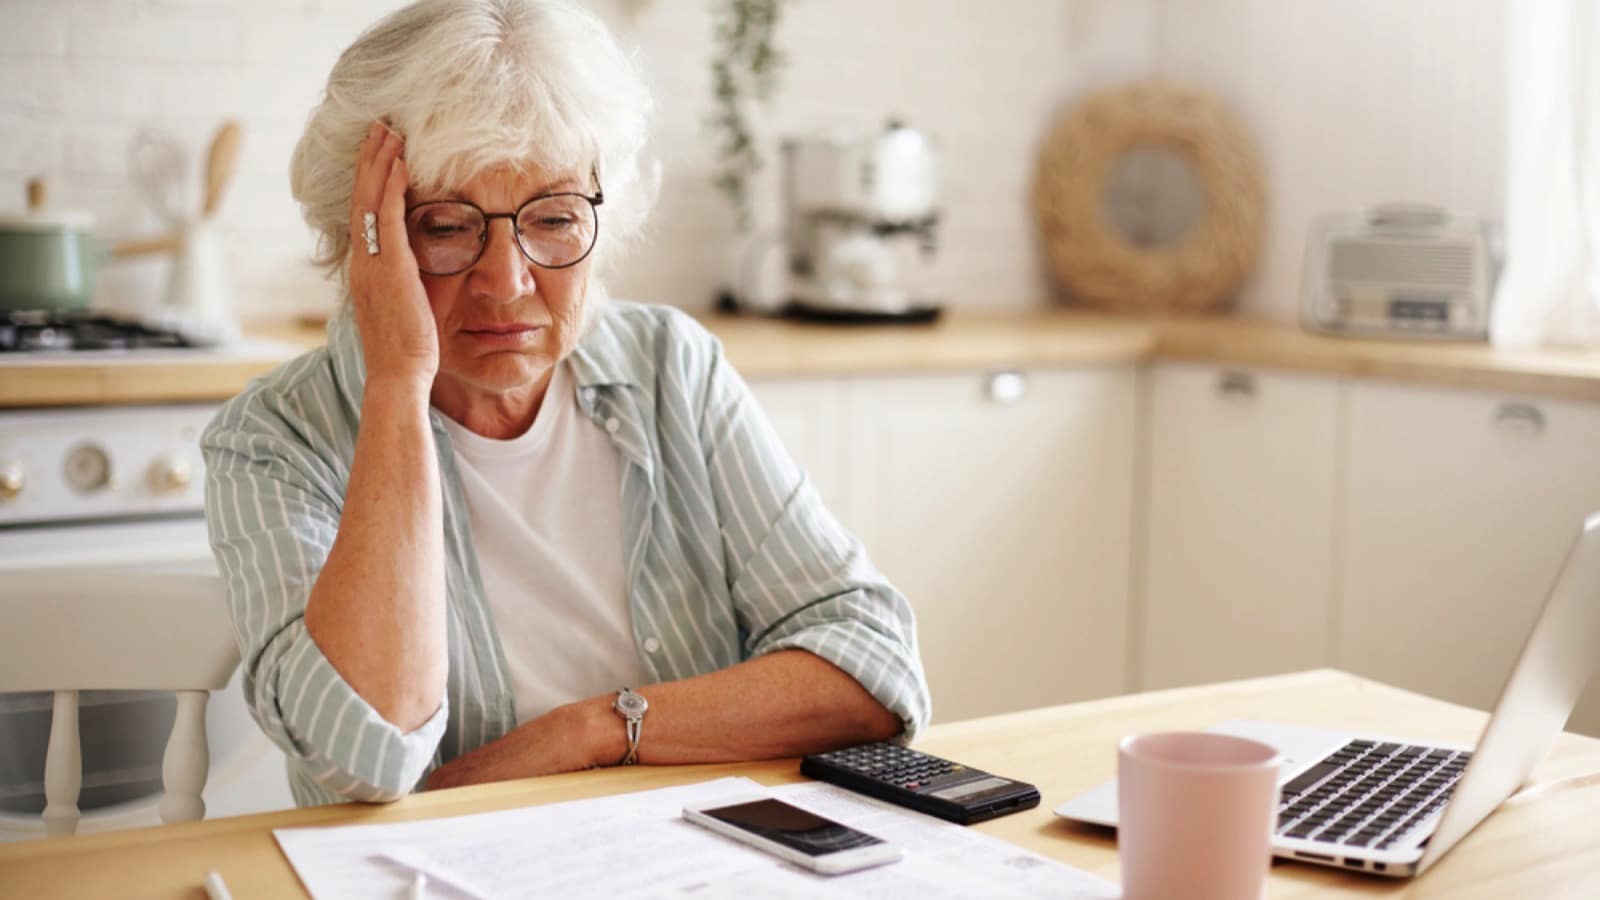 Old woman thinking about debt